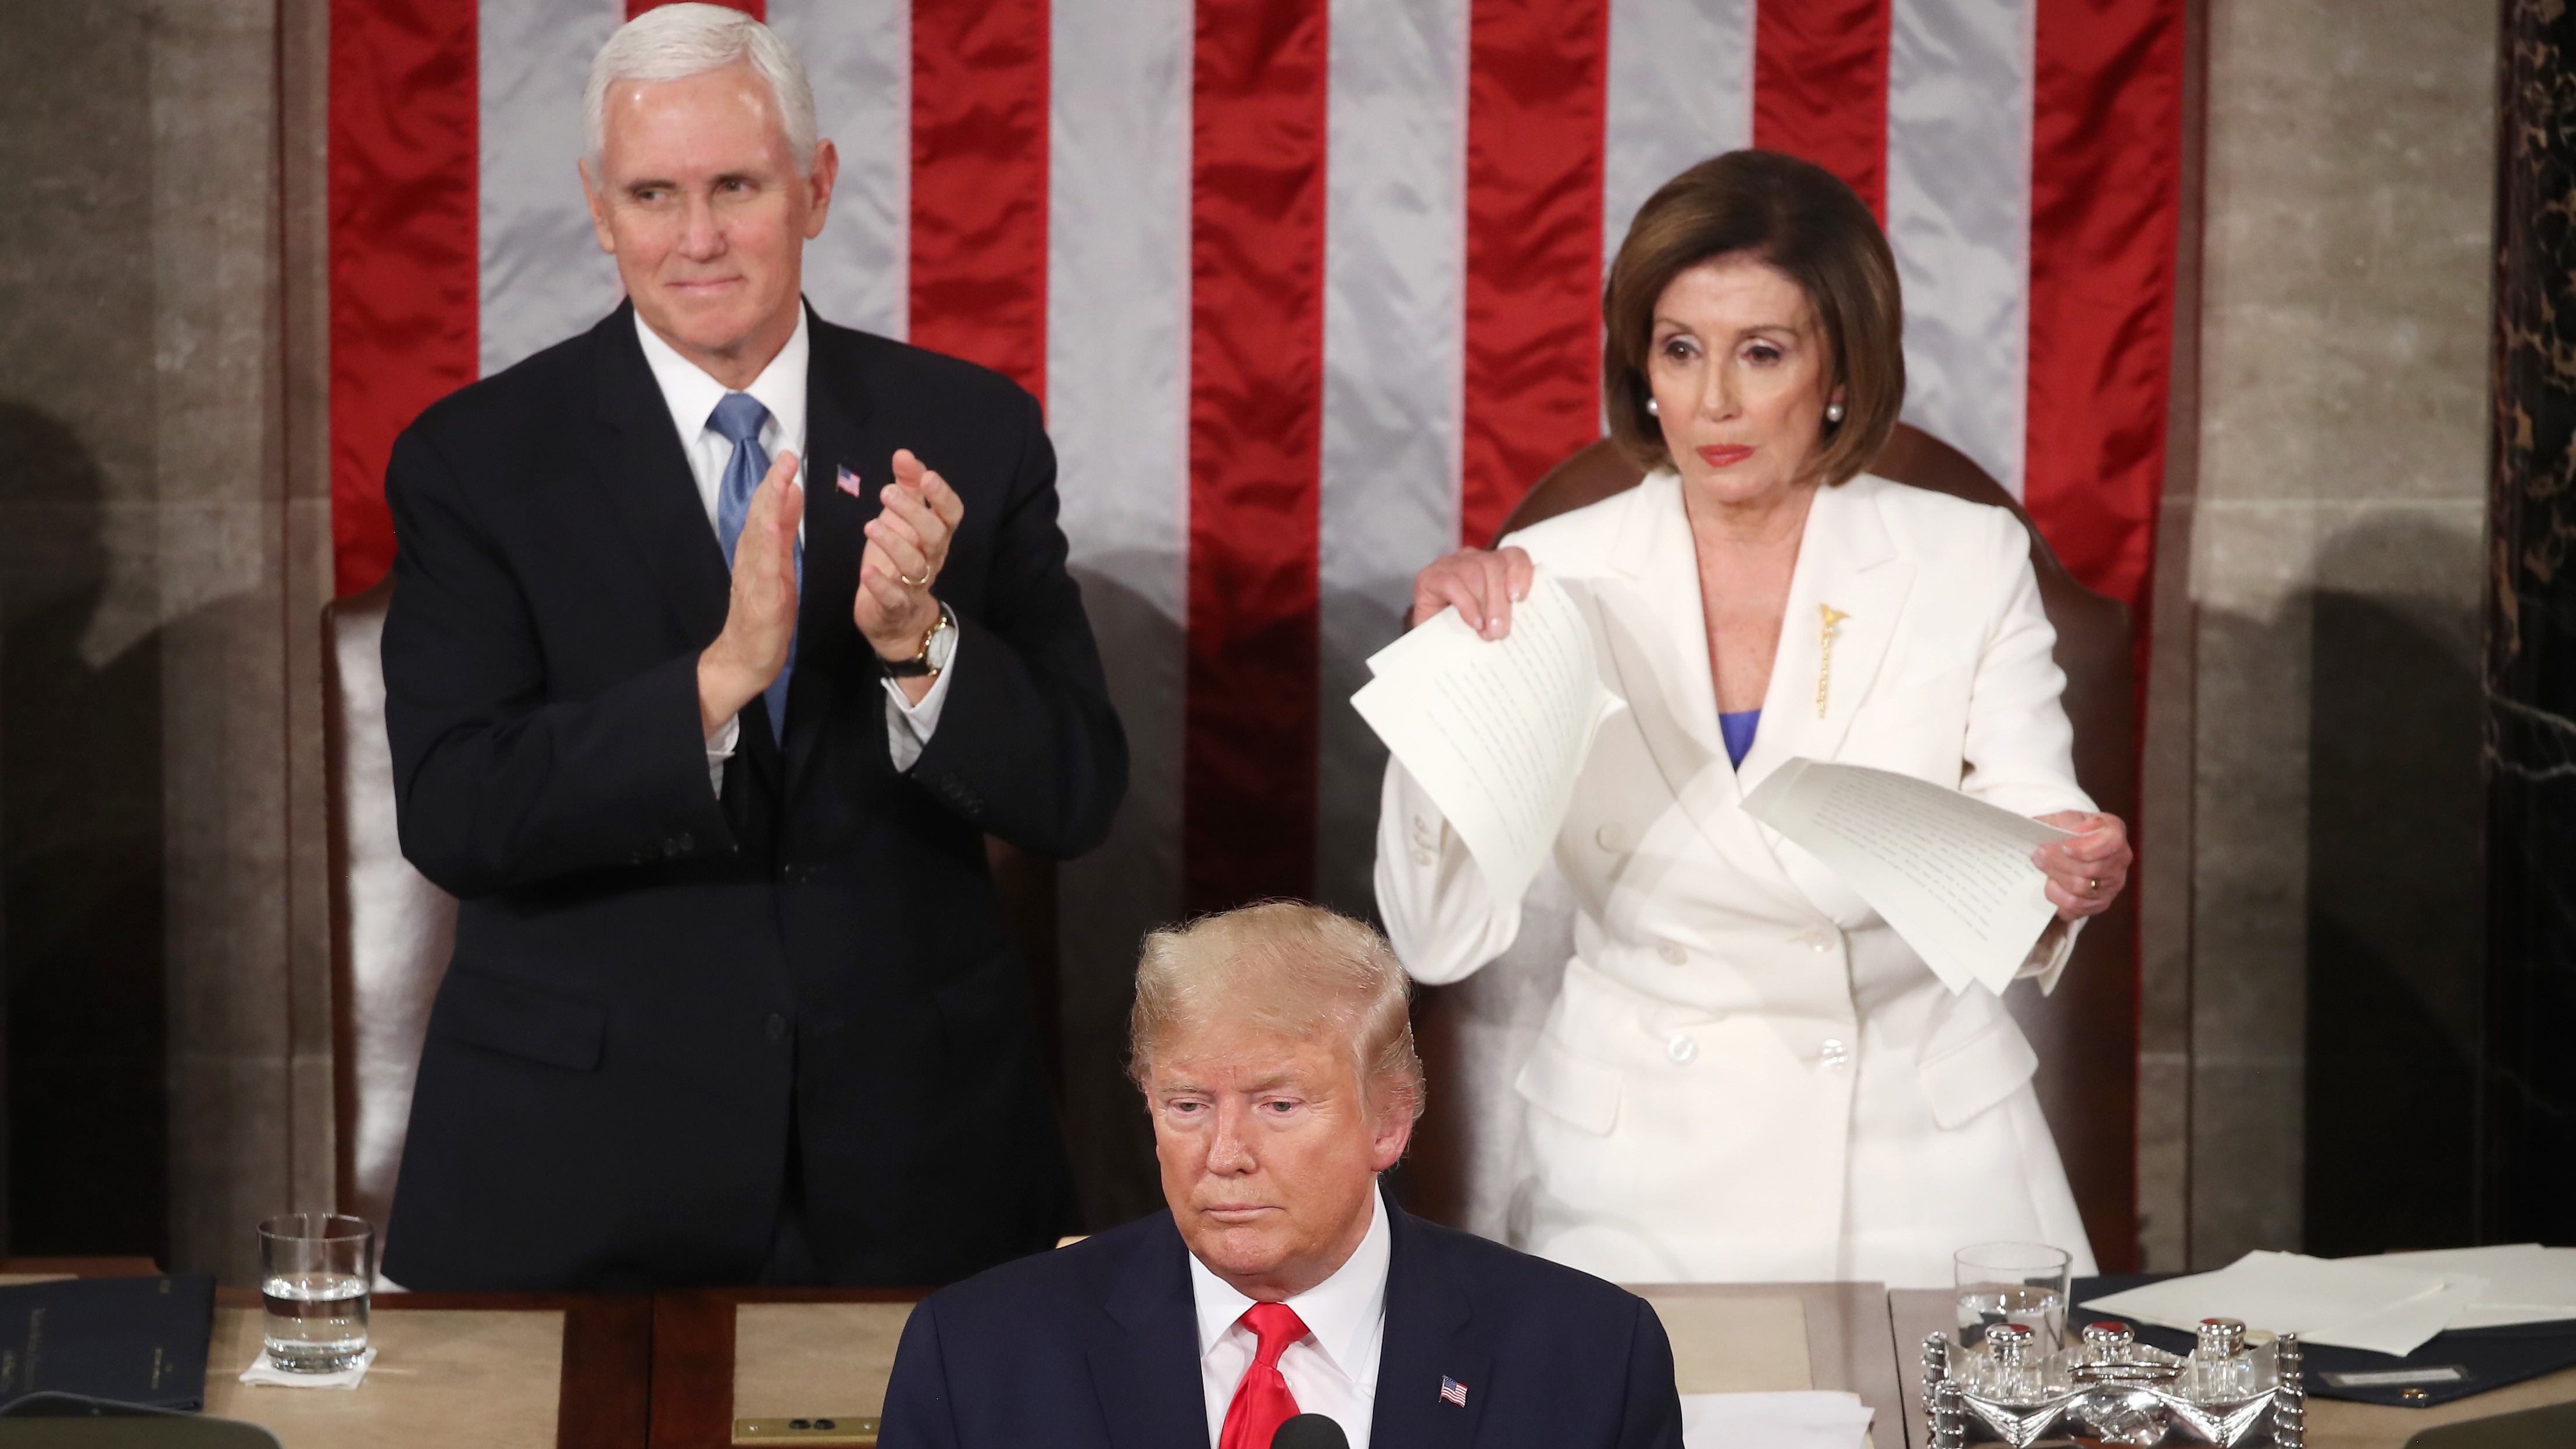 Breathtaking Dishonesty at the State of the Union